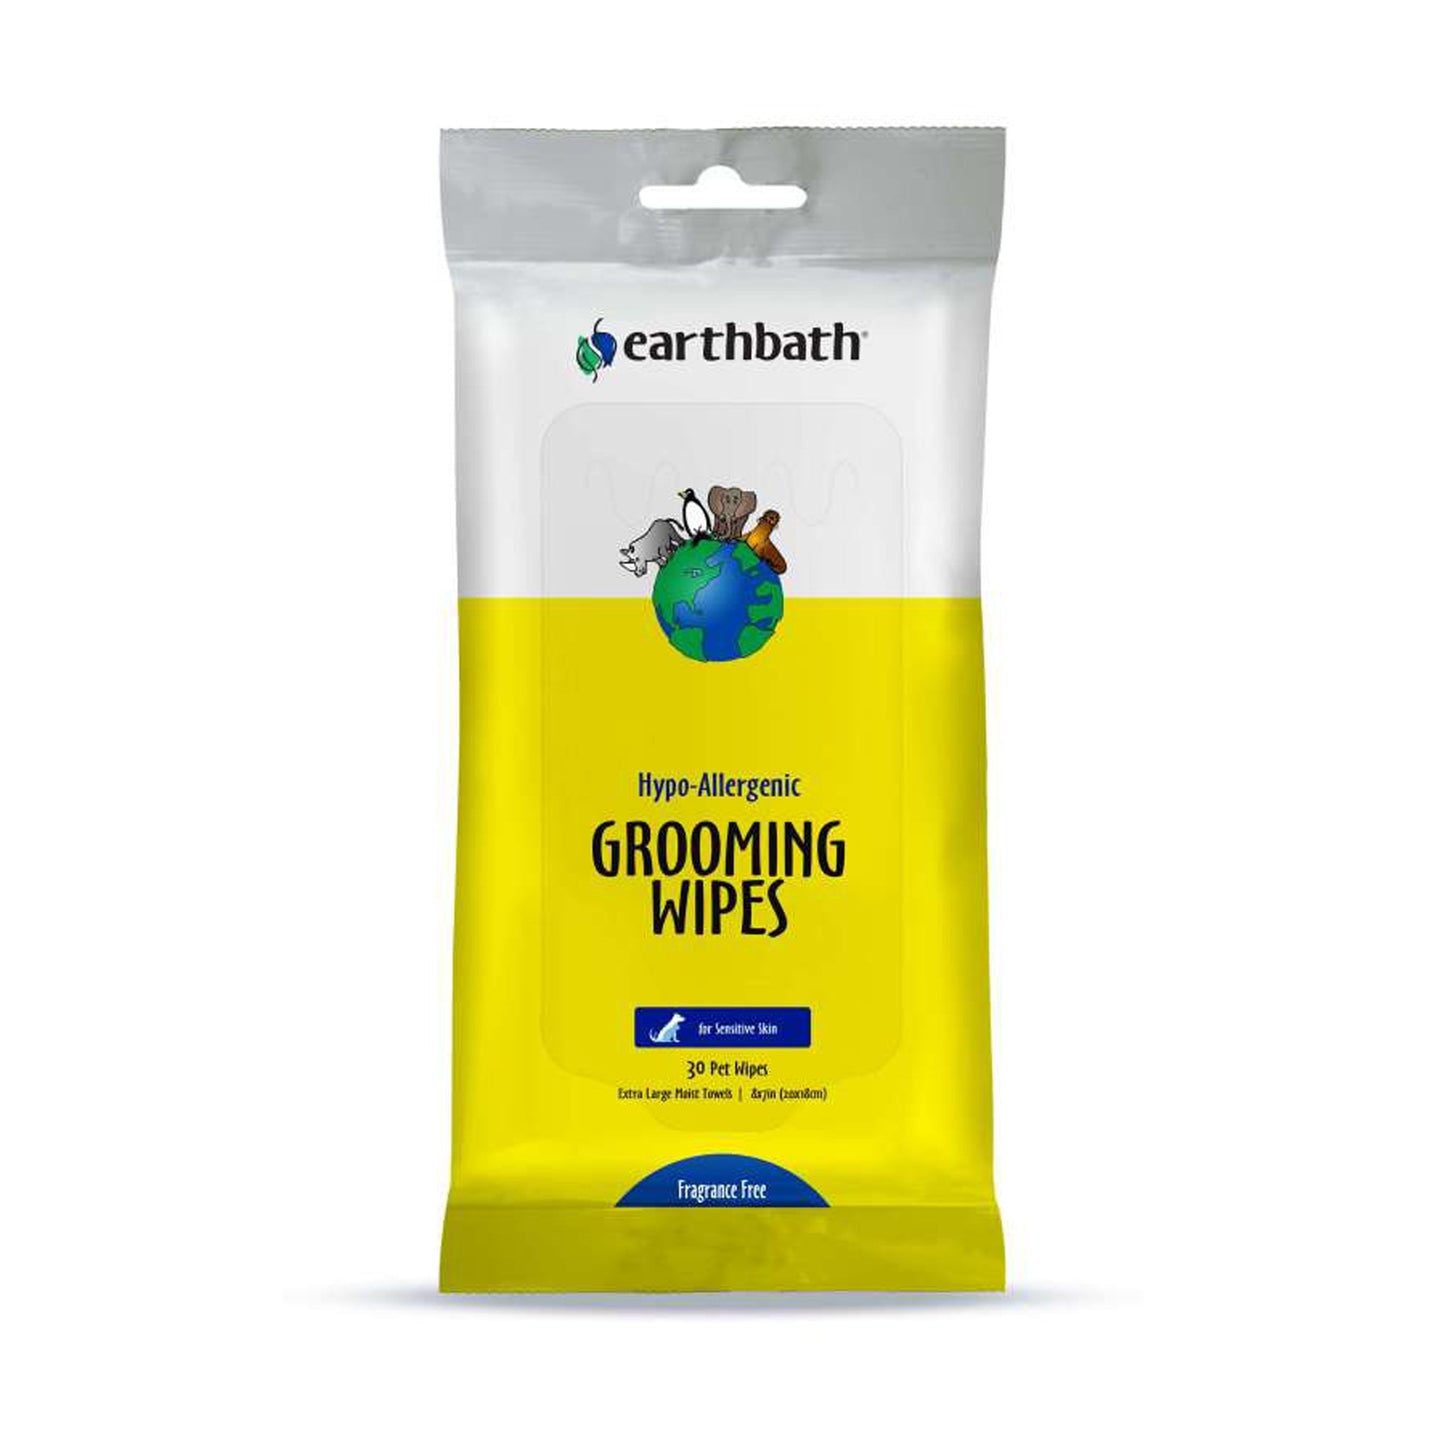 Earthbath Hypo-Allergenic Grooming Wipes, Fragrance Free 1ea/30 ct